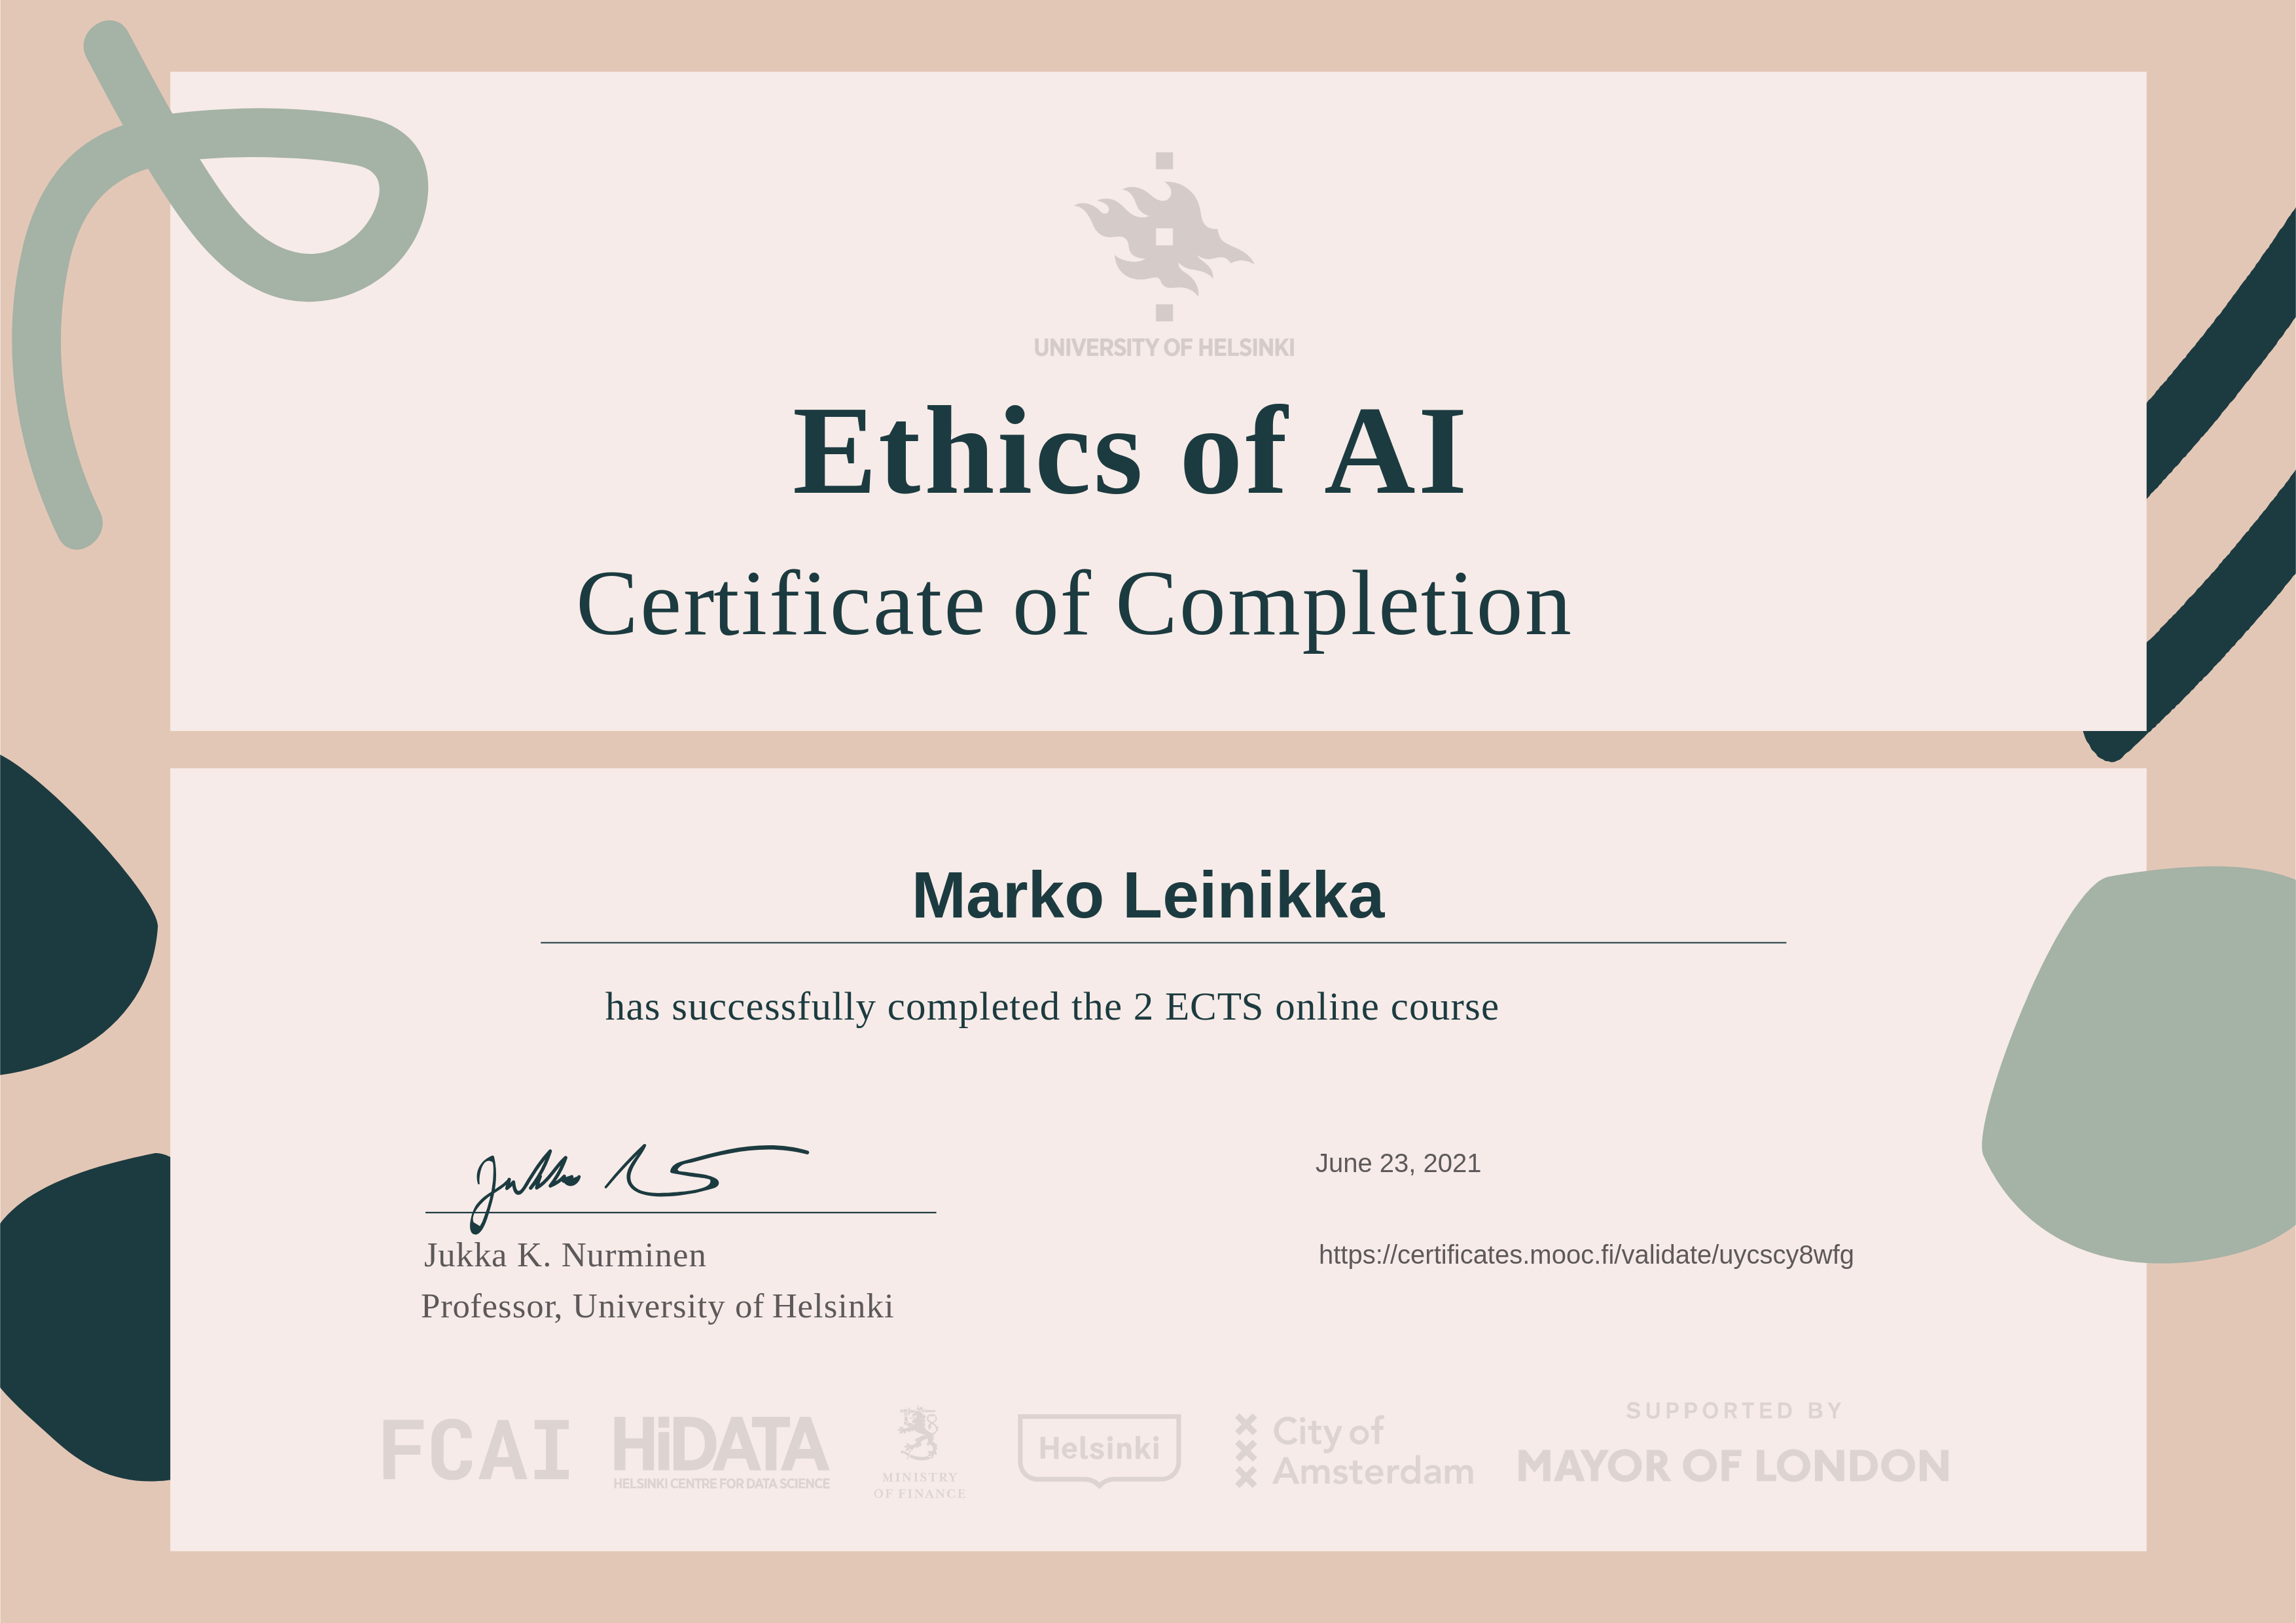 Ethics of AI course certificate